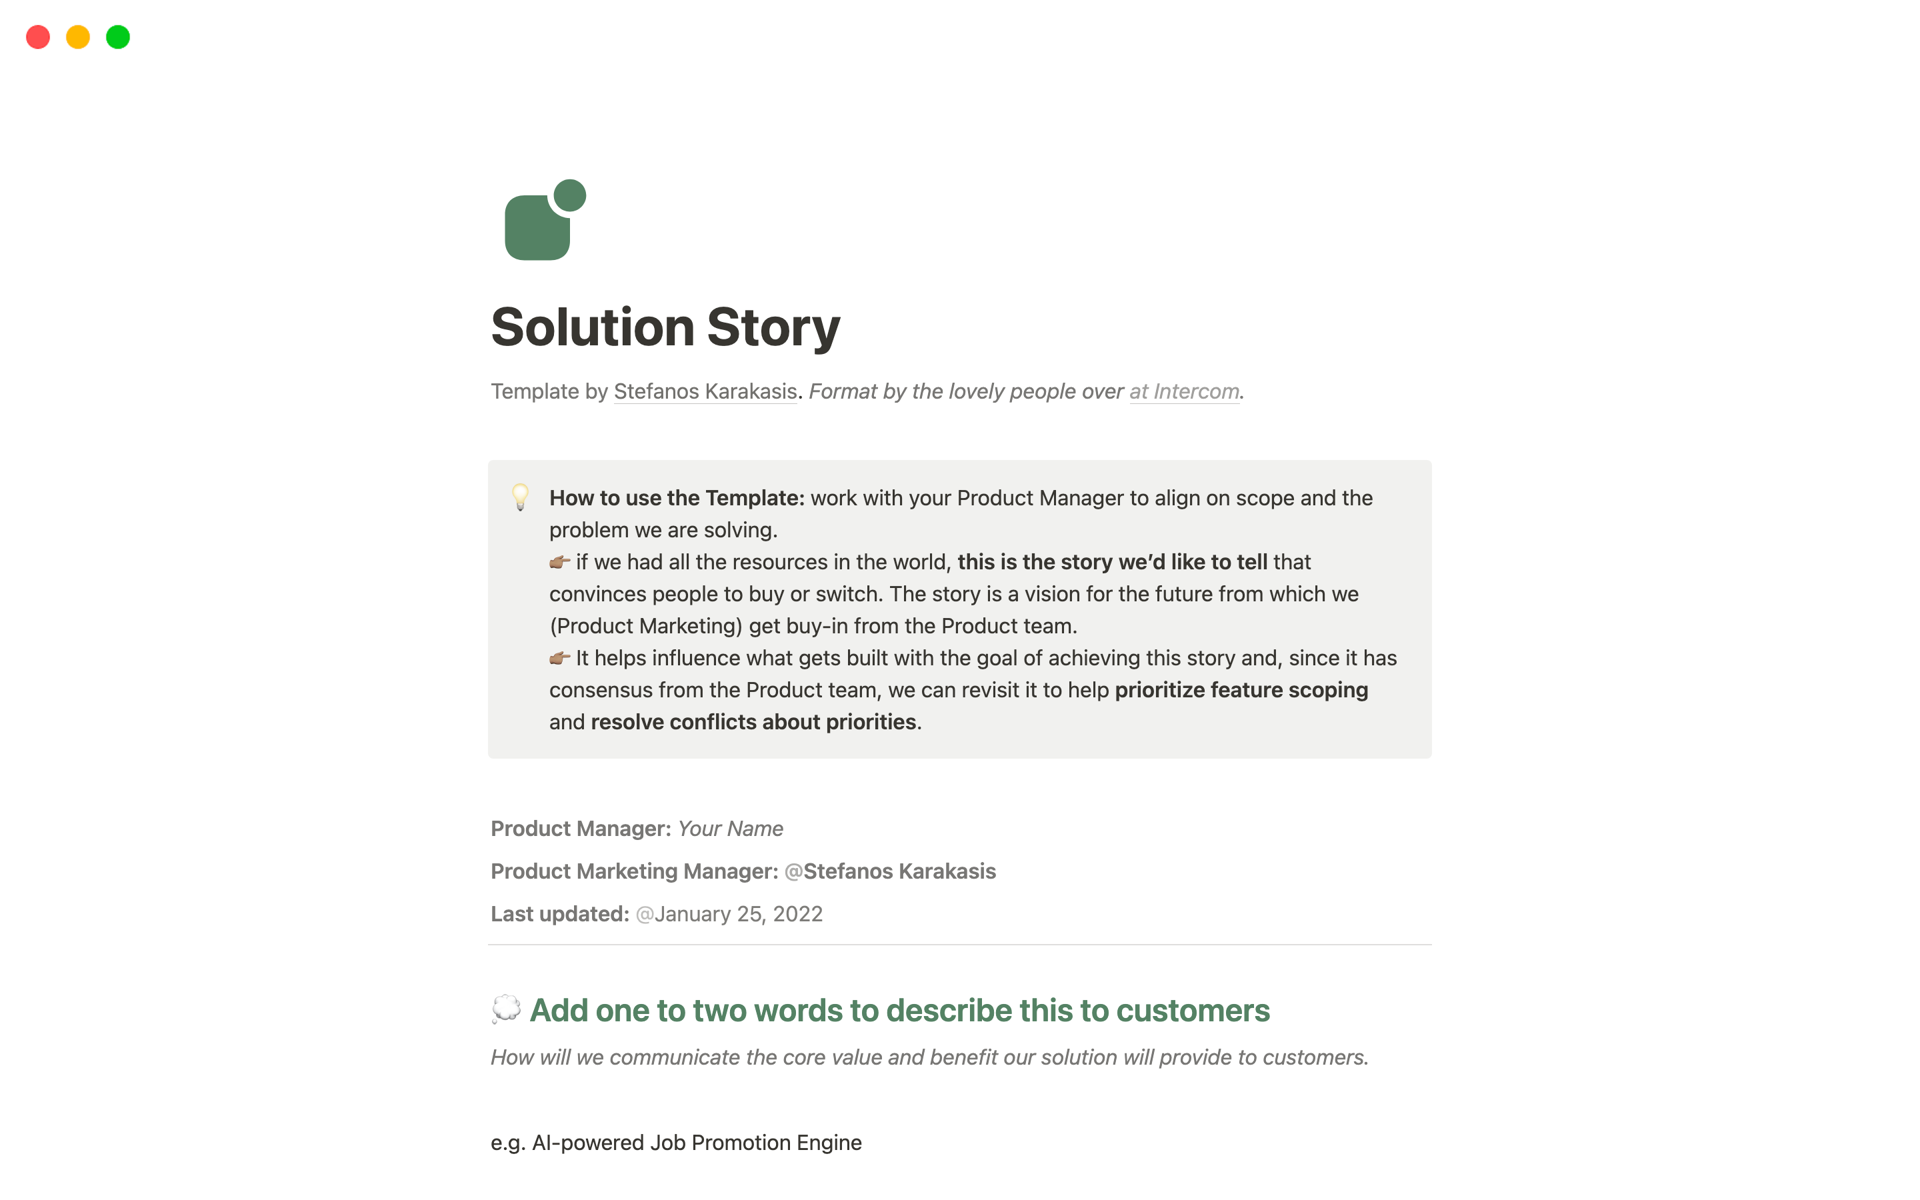 Solution Story - One Page Product Messaging Briefのテンプレートのプレビュー